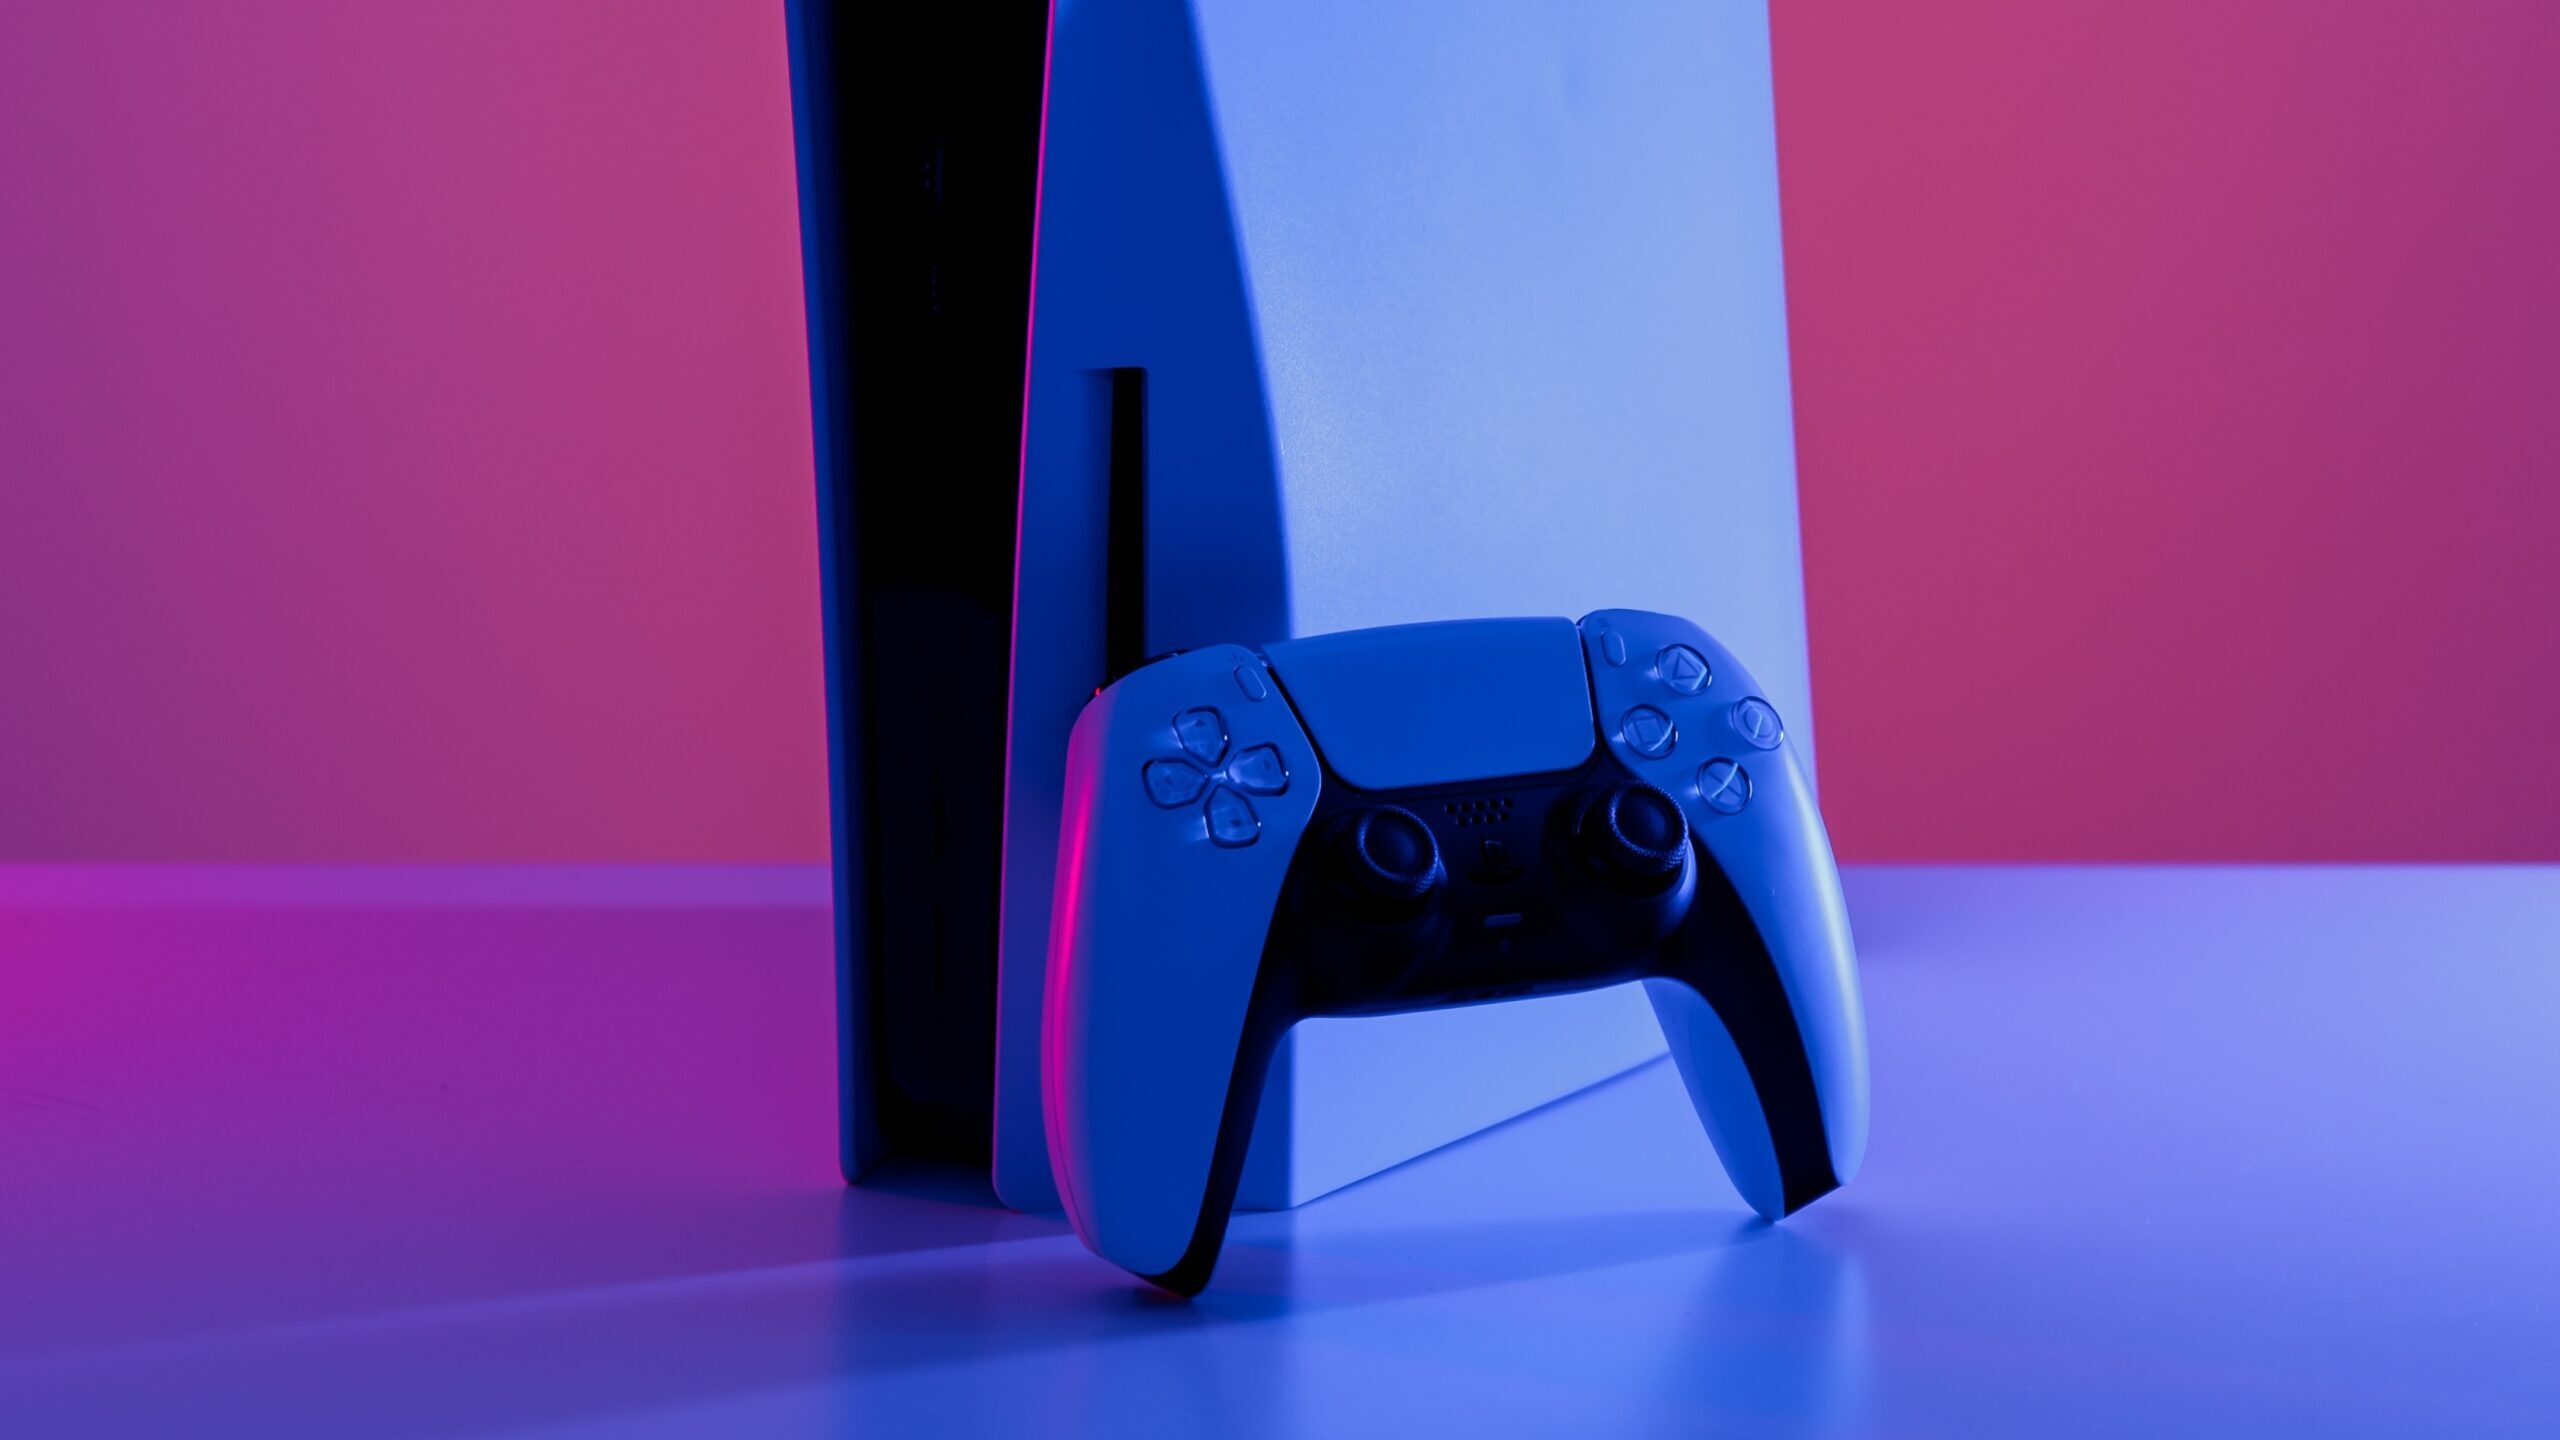 PlayStation 5 Price: Here's How Much We Think the PS5 Will Cost